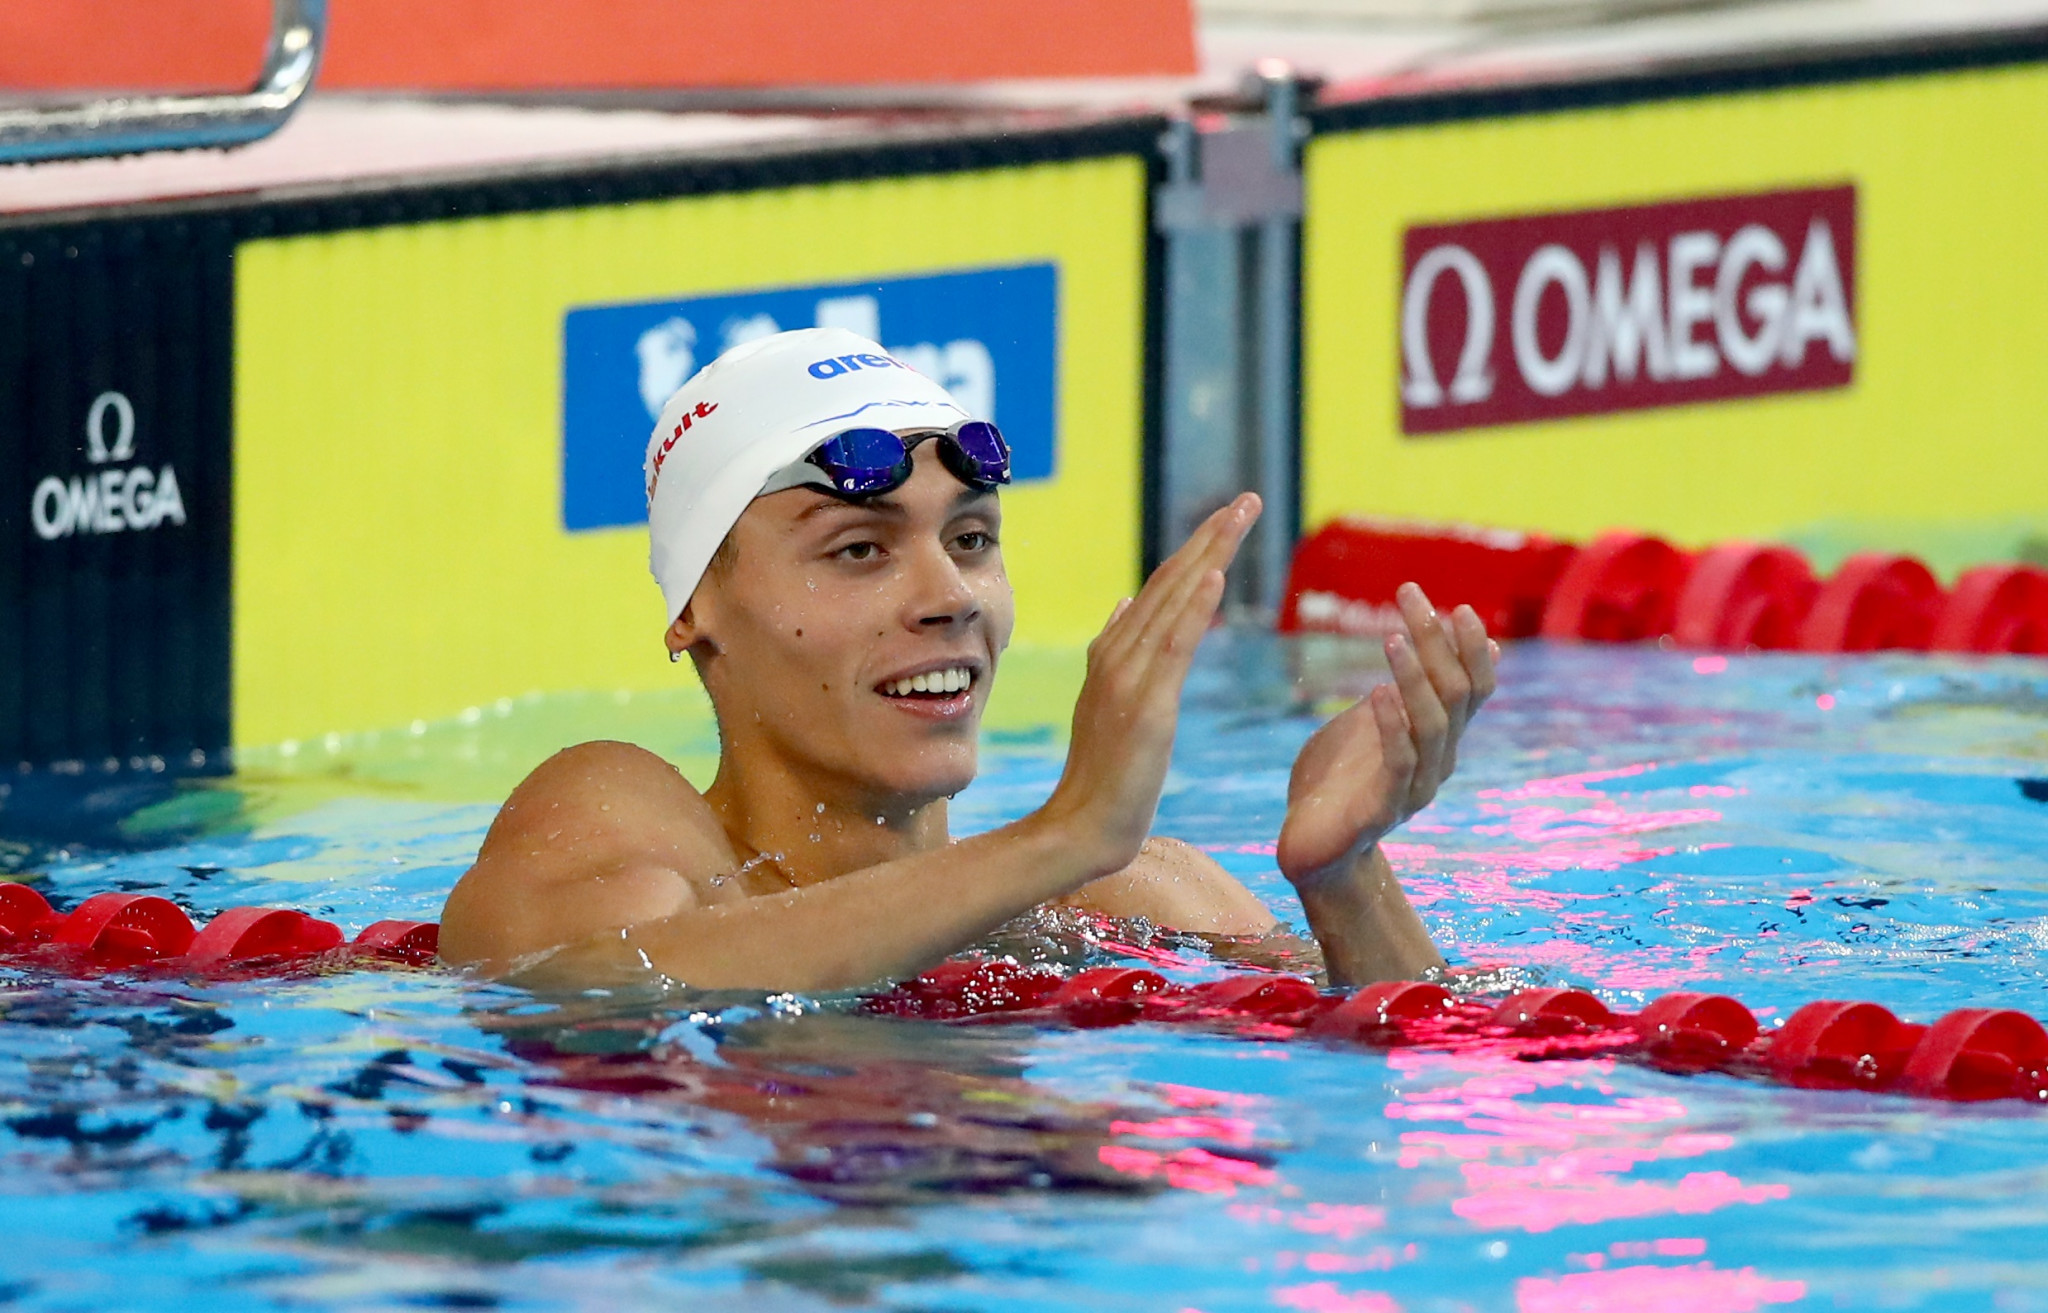 Romania's David Popovici says he is "extremely pumped" to compete in Melbourne ©Getty Images